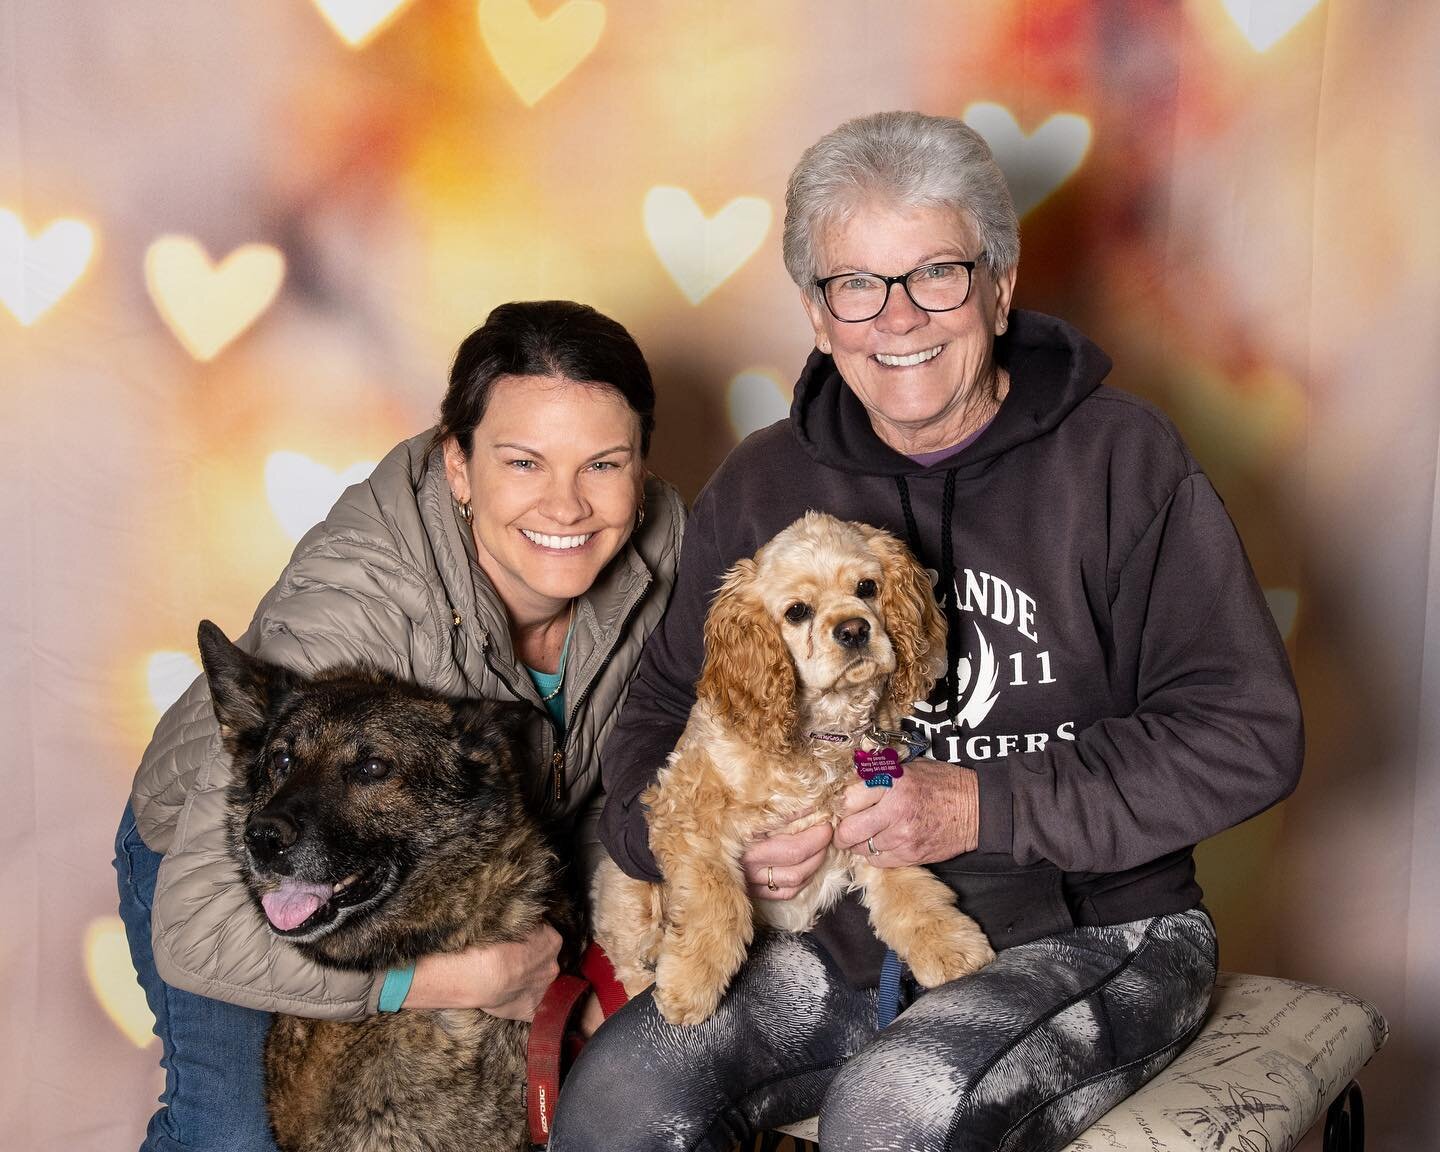 Happy Valentine&rsquo;s Day from the Hazelnut hill ladies. (Don&rsquo;t worry, the four legged ones don&rsquo;t help). We loved all the orders and custom treats we made for you! 

Thank you @mjacksonphotography and @k9swimcenter for an epic photo sho